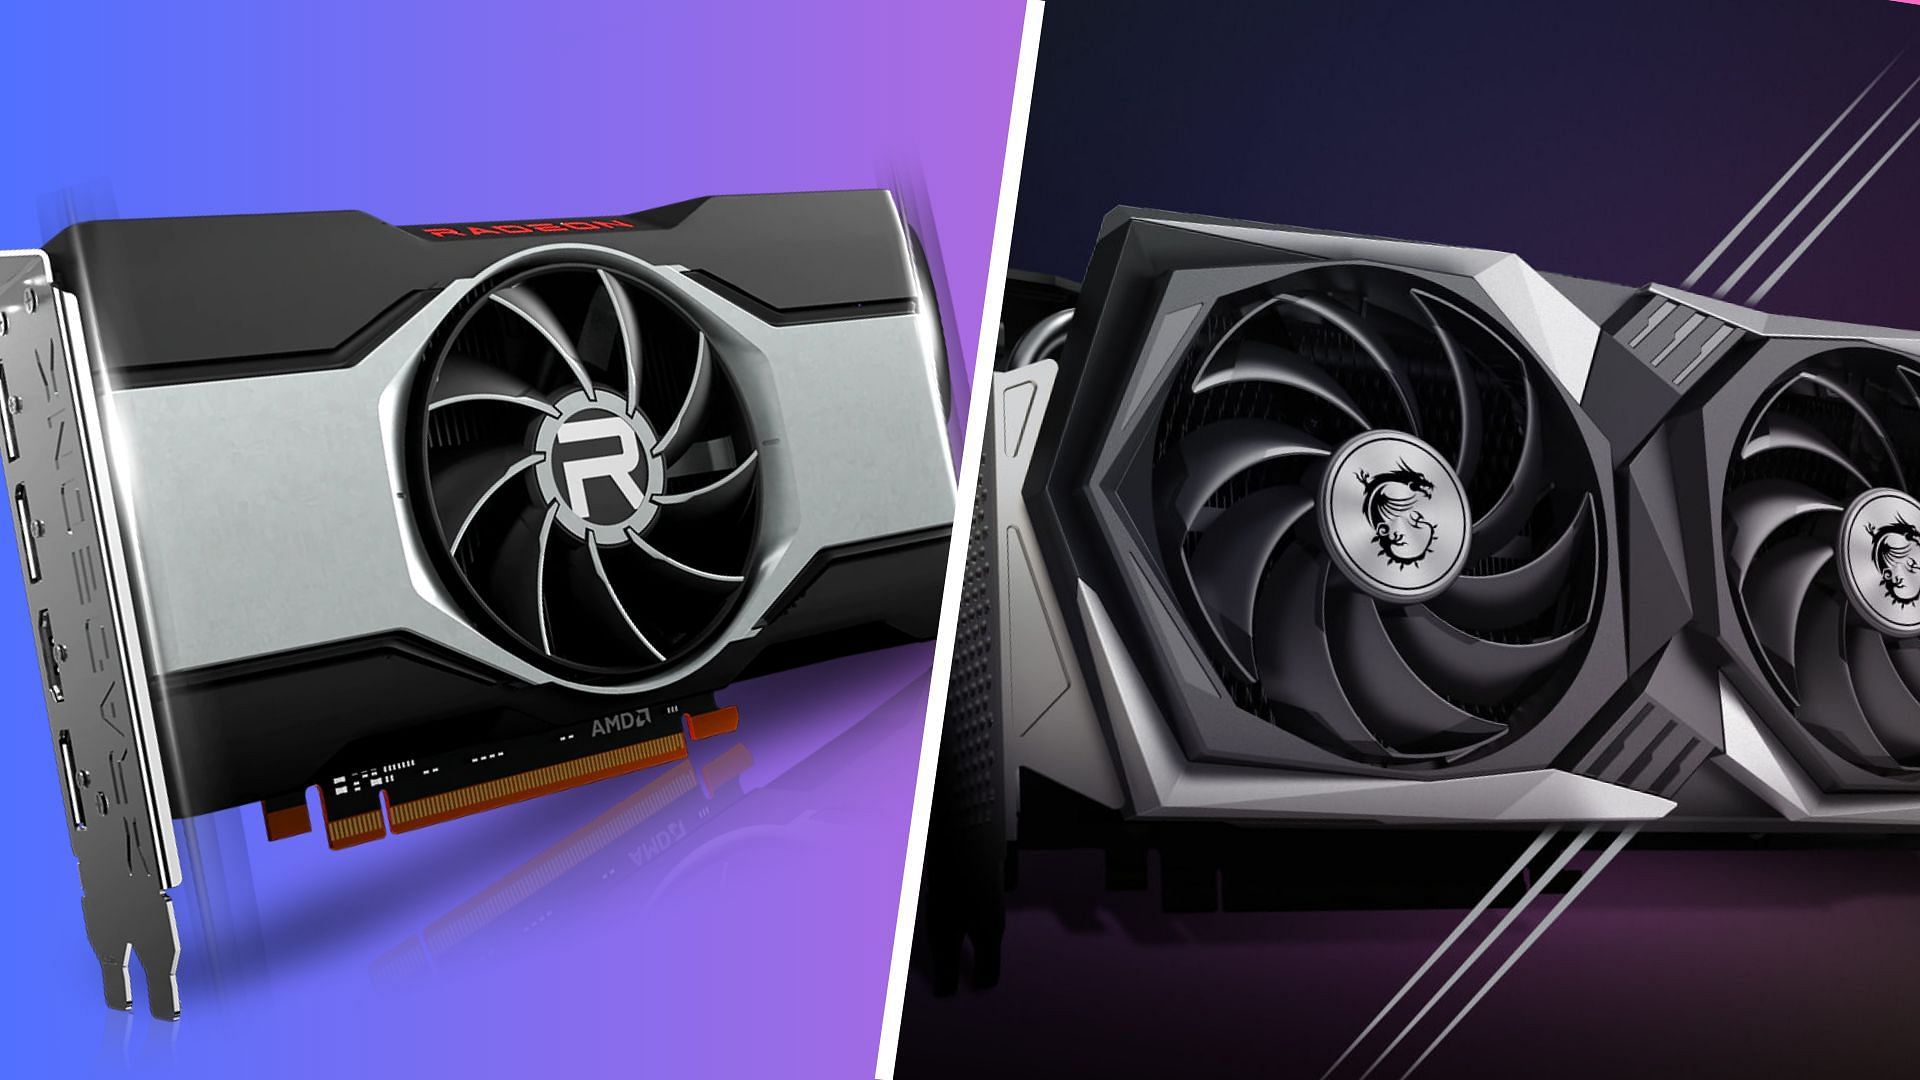 The AMD Radeon RX 6600 and RX 6600 XT are superb mid-range graphics cards (Image via AMD and MSI)